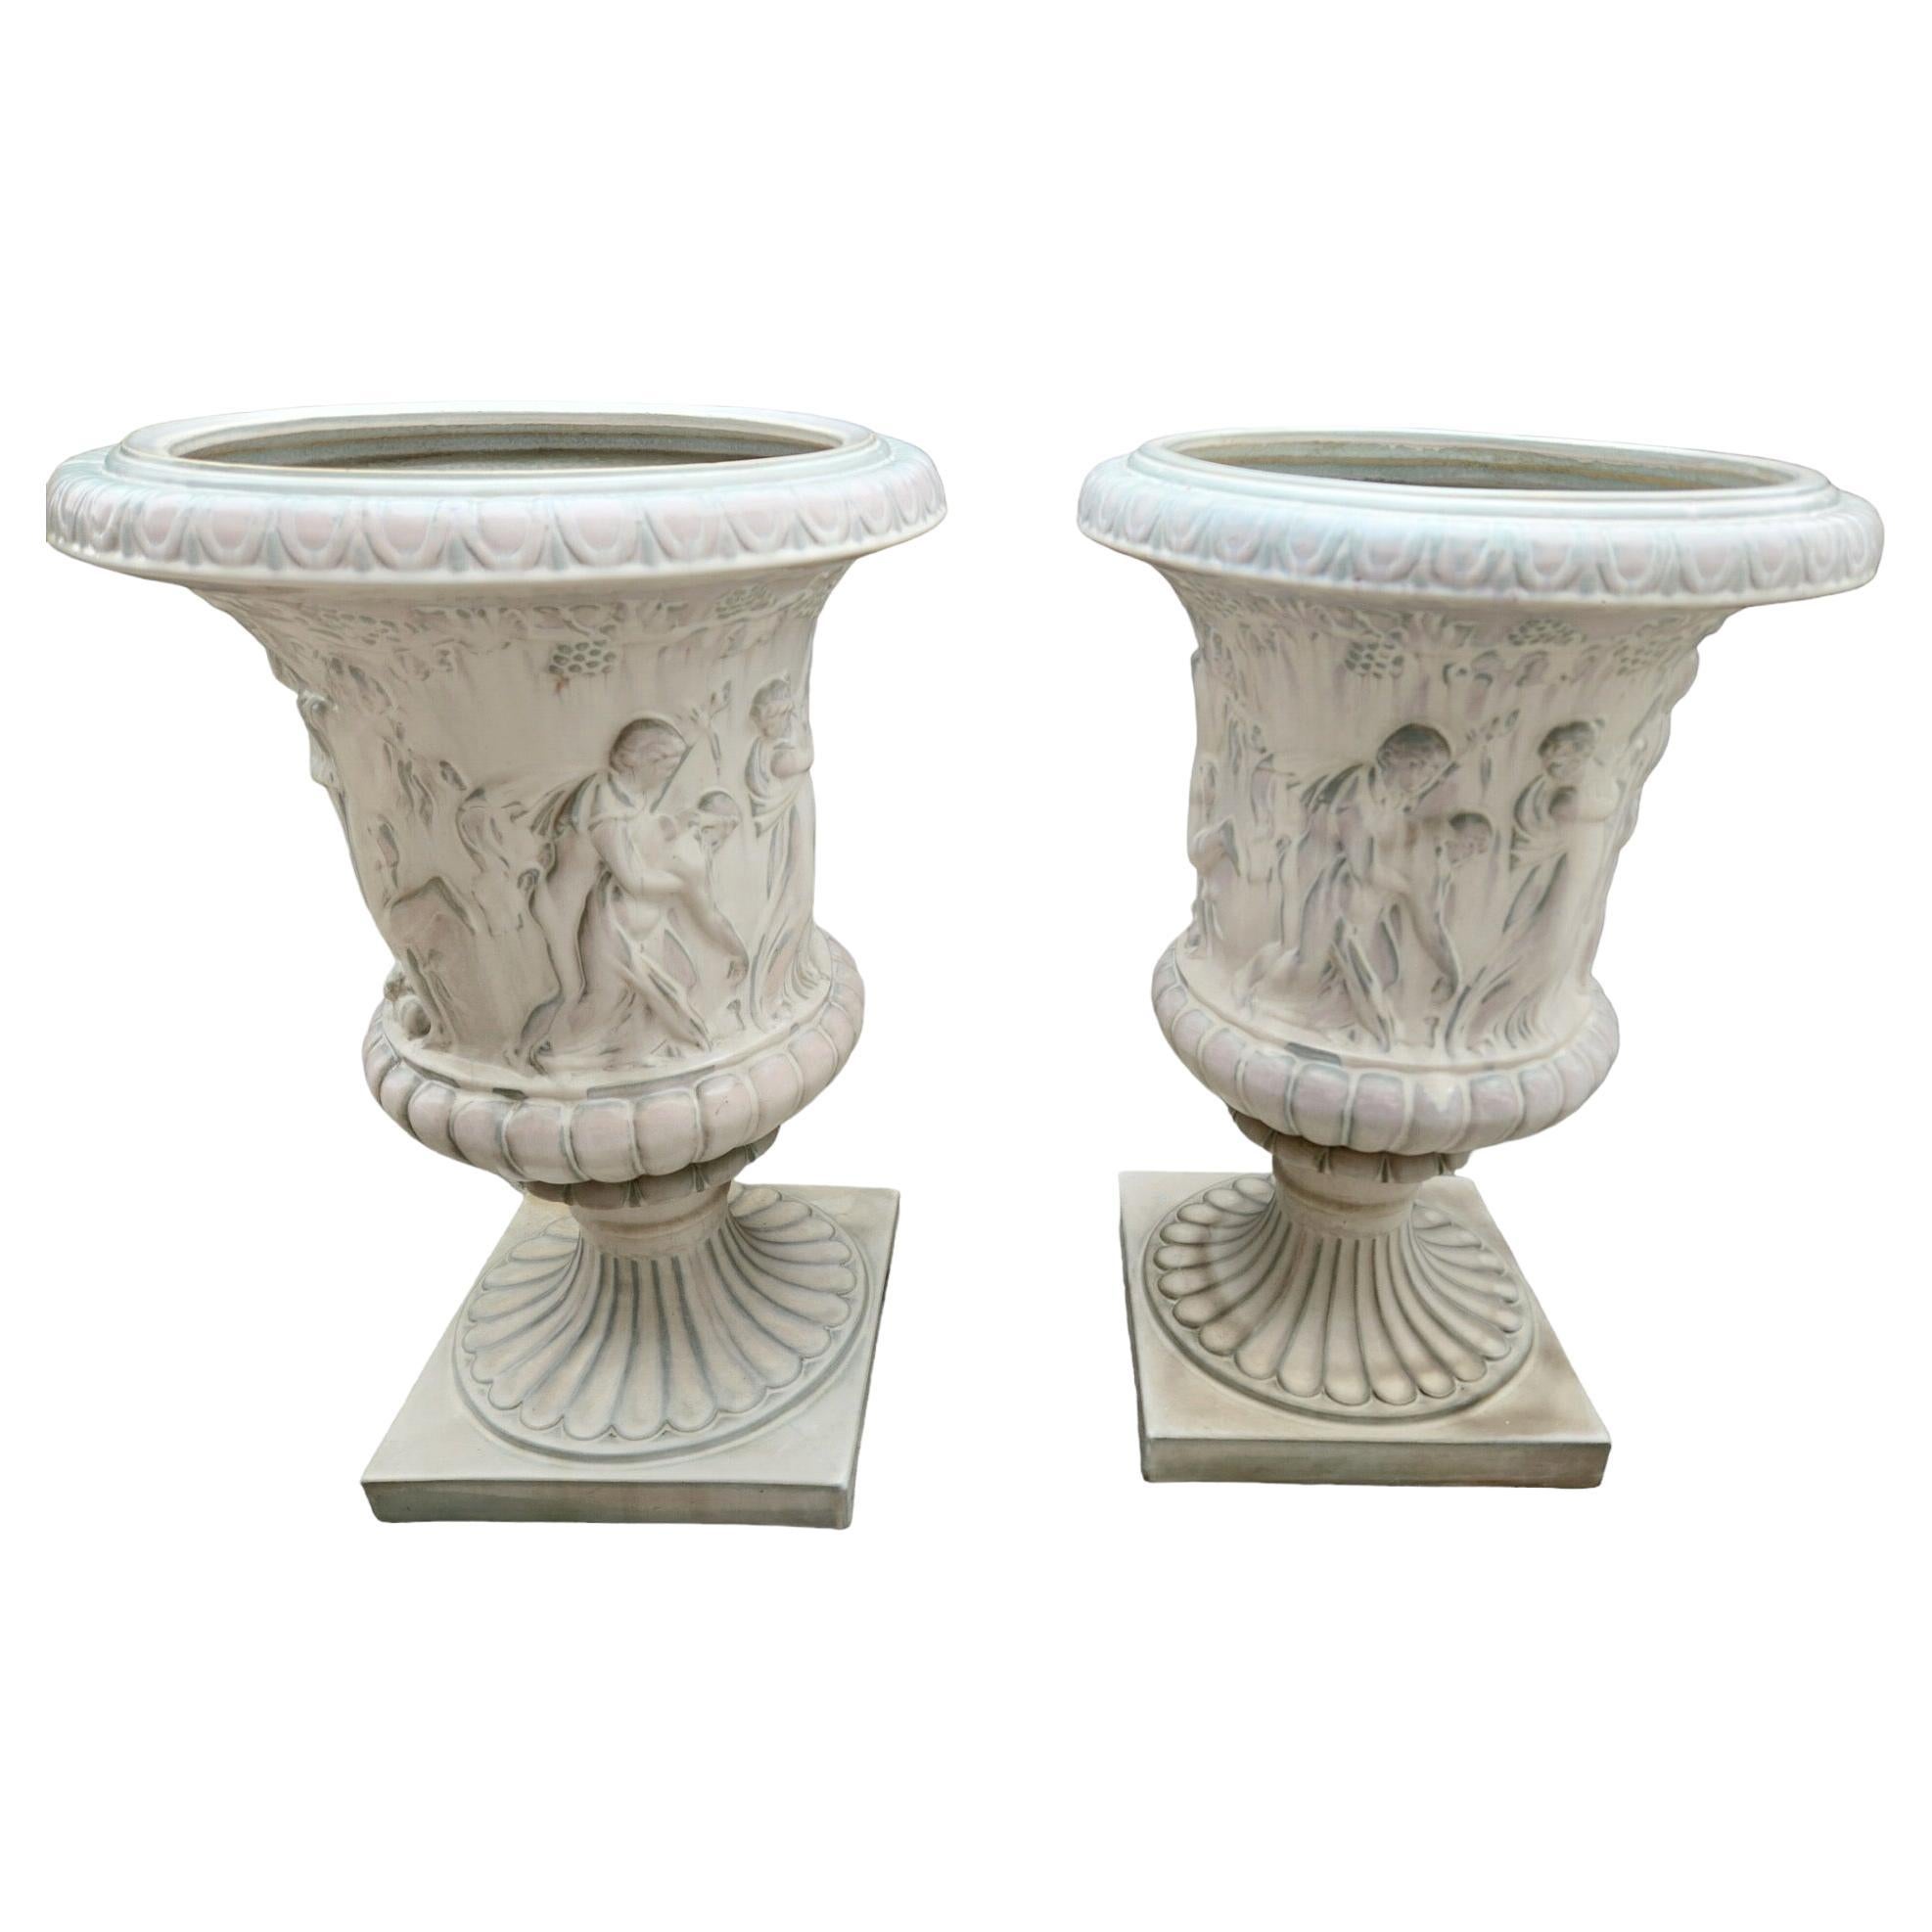 Pair of Vintage Glazed Neoclassical Planters